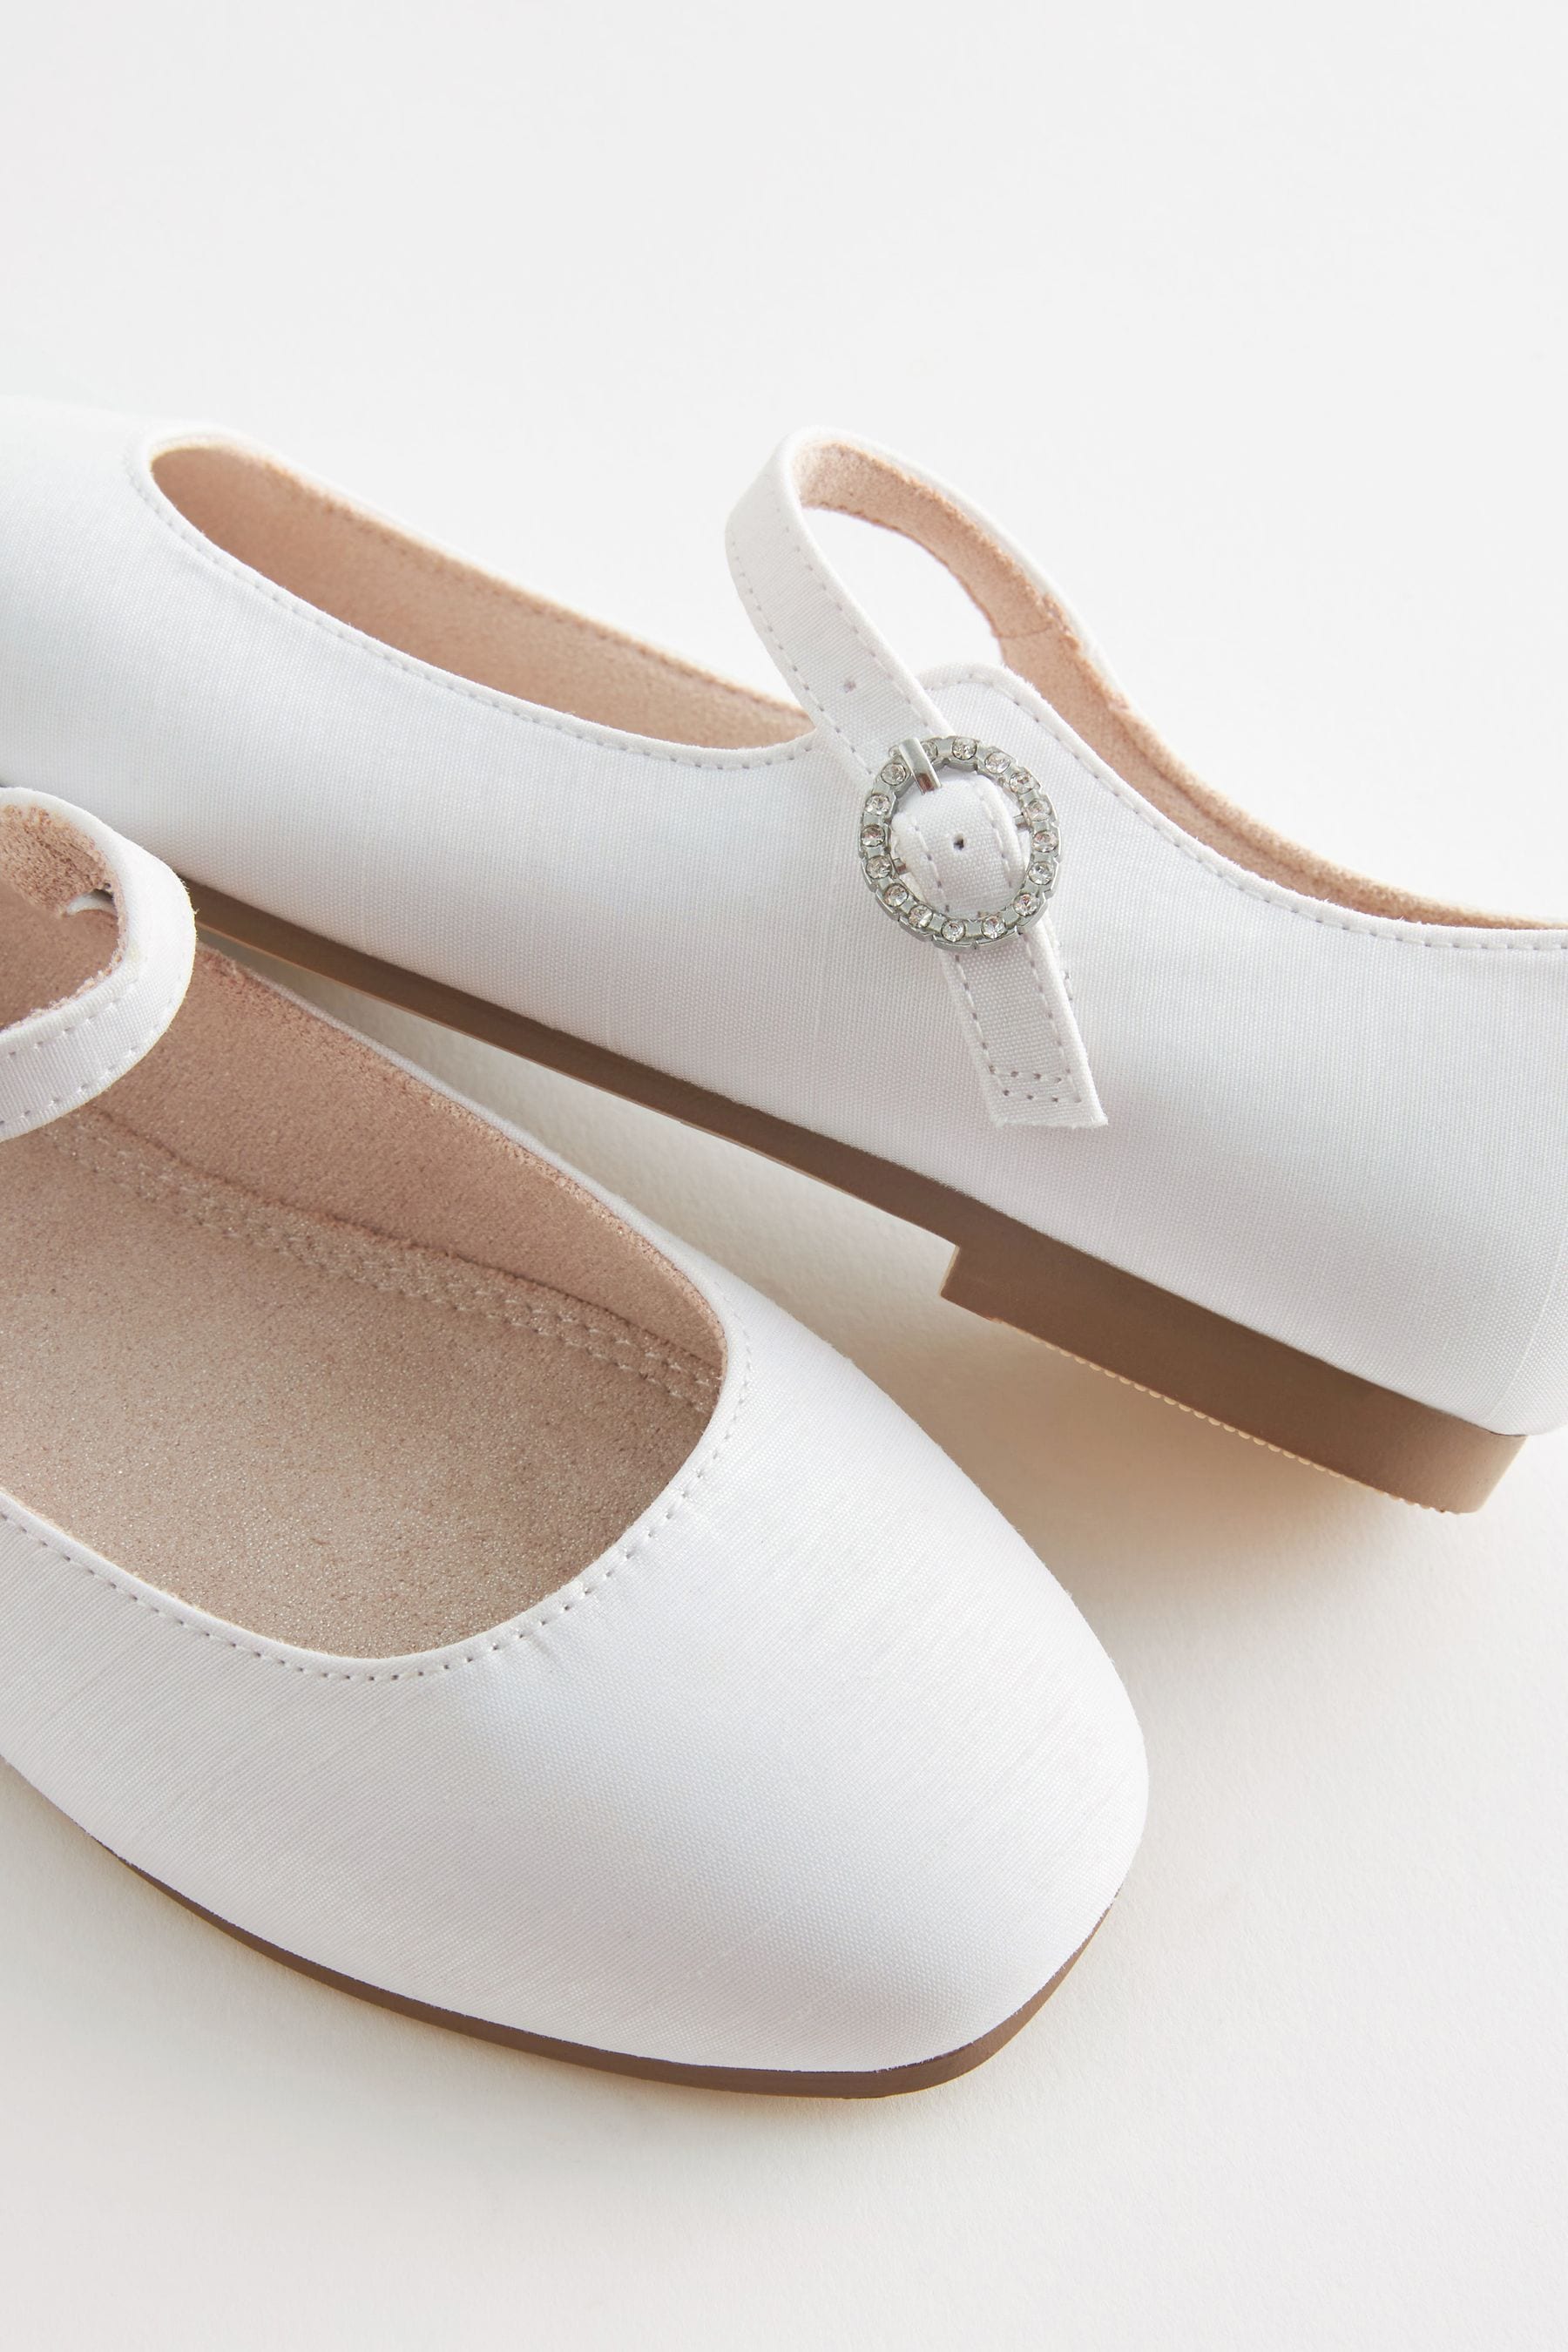 Buy Square Toe Mary Jane Occasion Shoes from the Next UK online shop